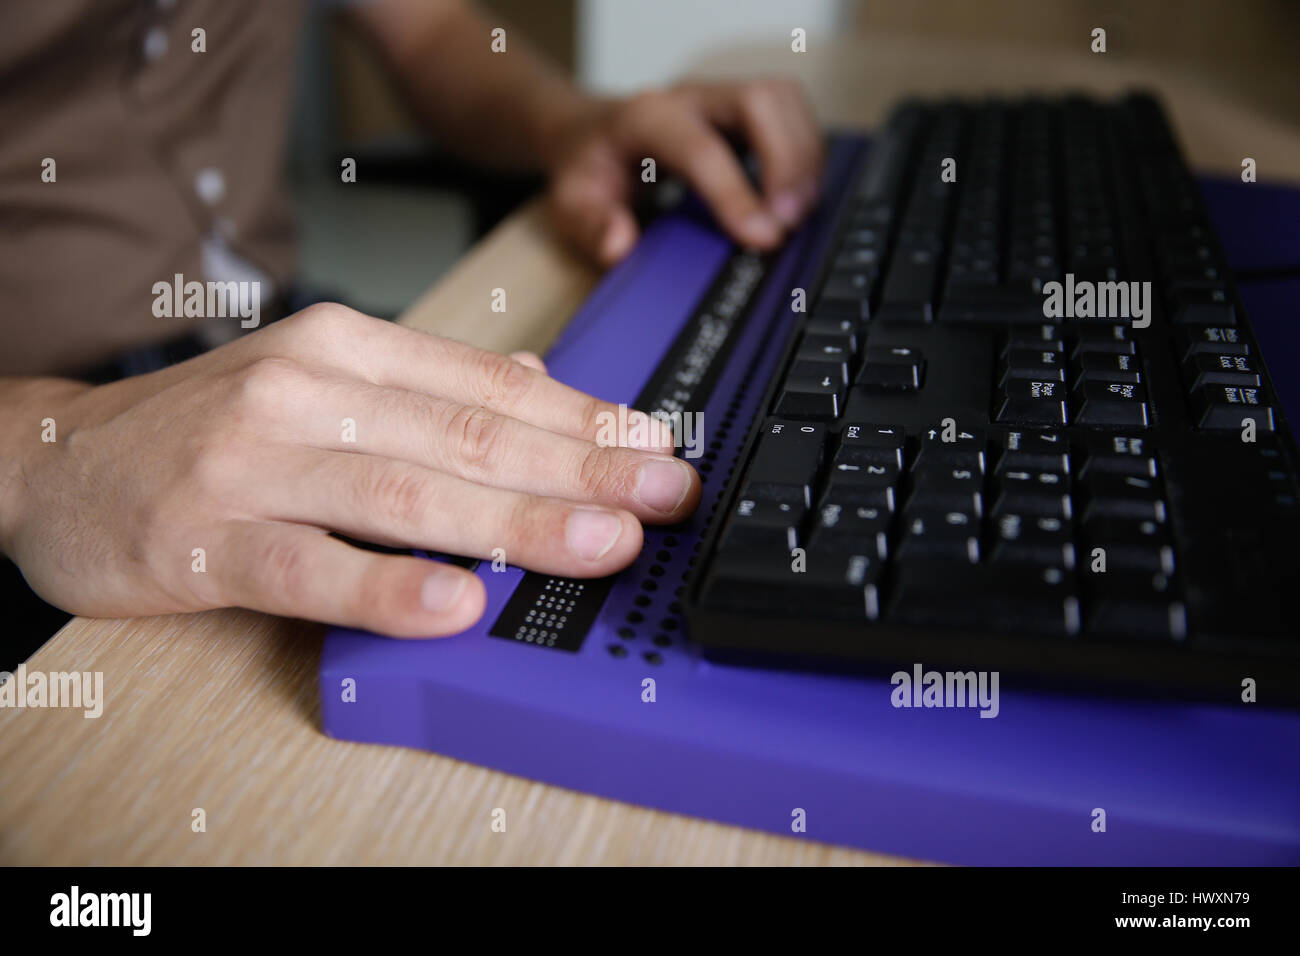 Blind person using computer with braille computer display and a computer keyboard. Blindness aid, visual impairment, independent life concept. Stock Photo